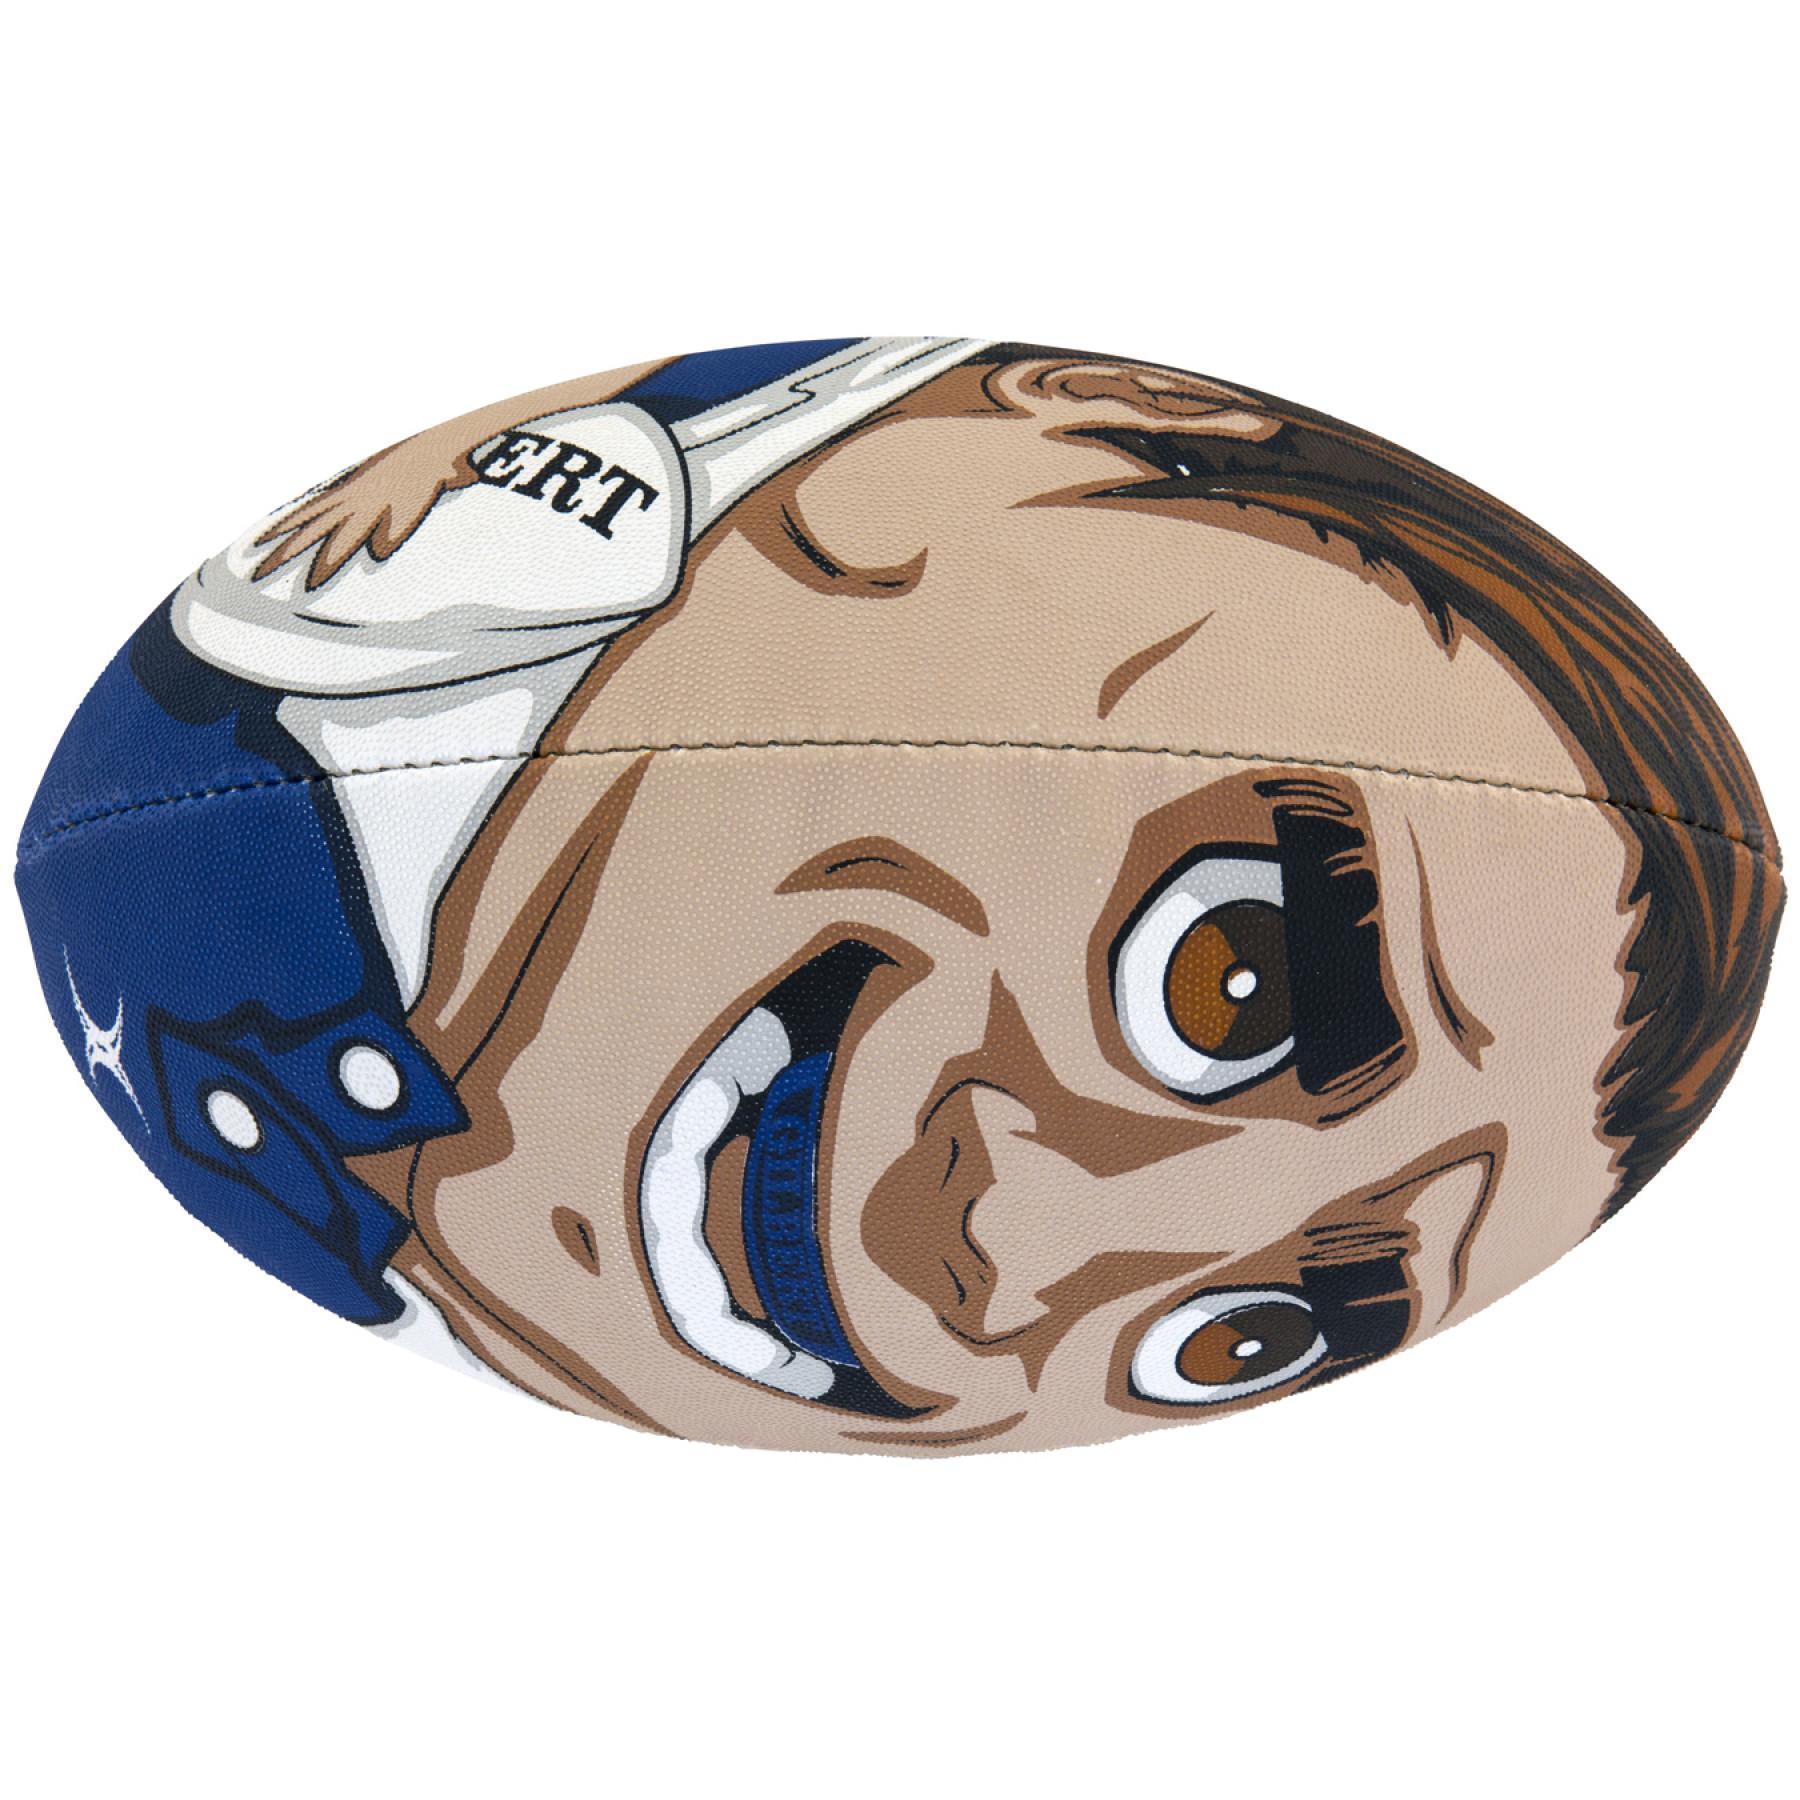 Rugby ball Gilbert Player NO. 14 (taille 5)